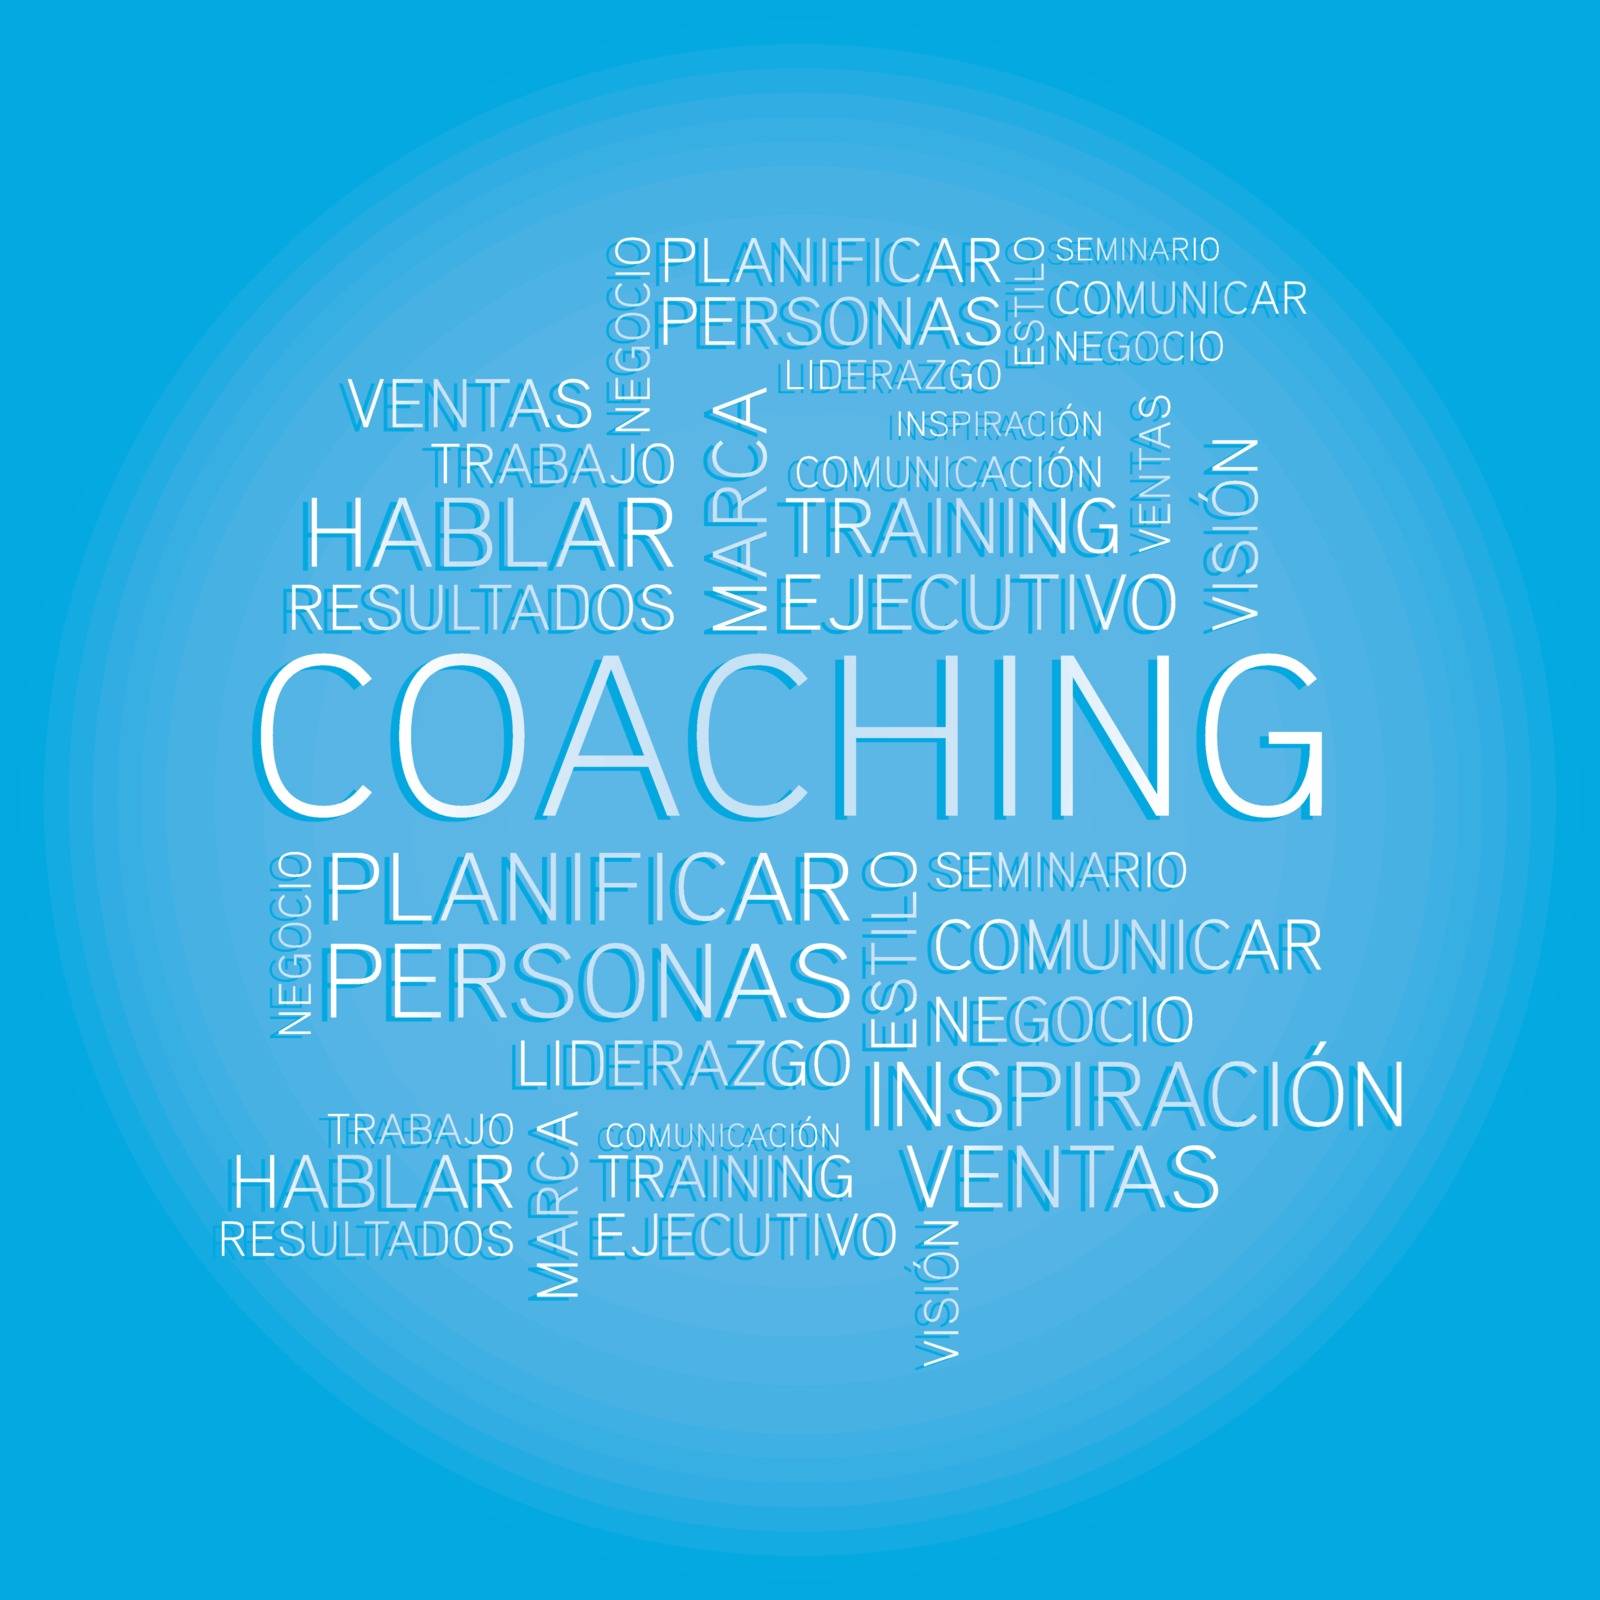 Coaching concept related spanish words in tag